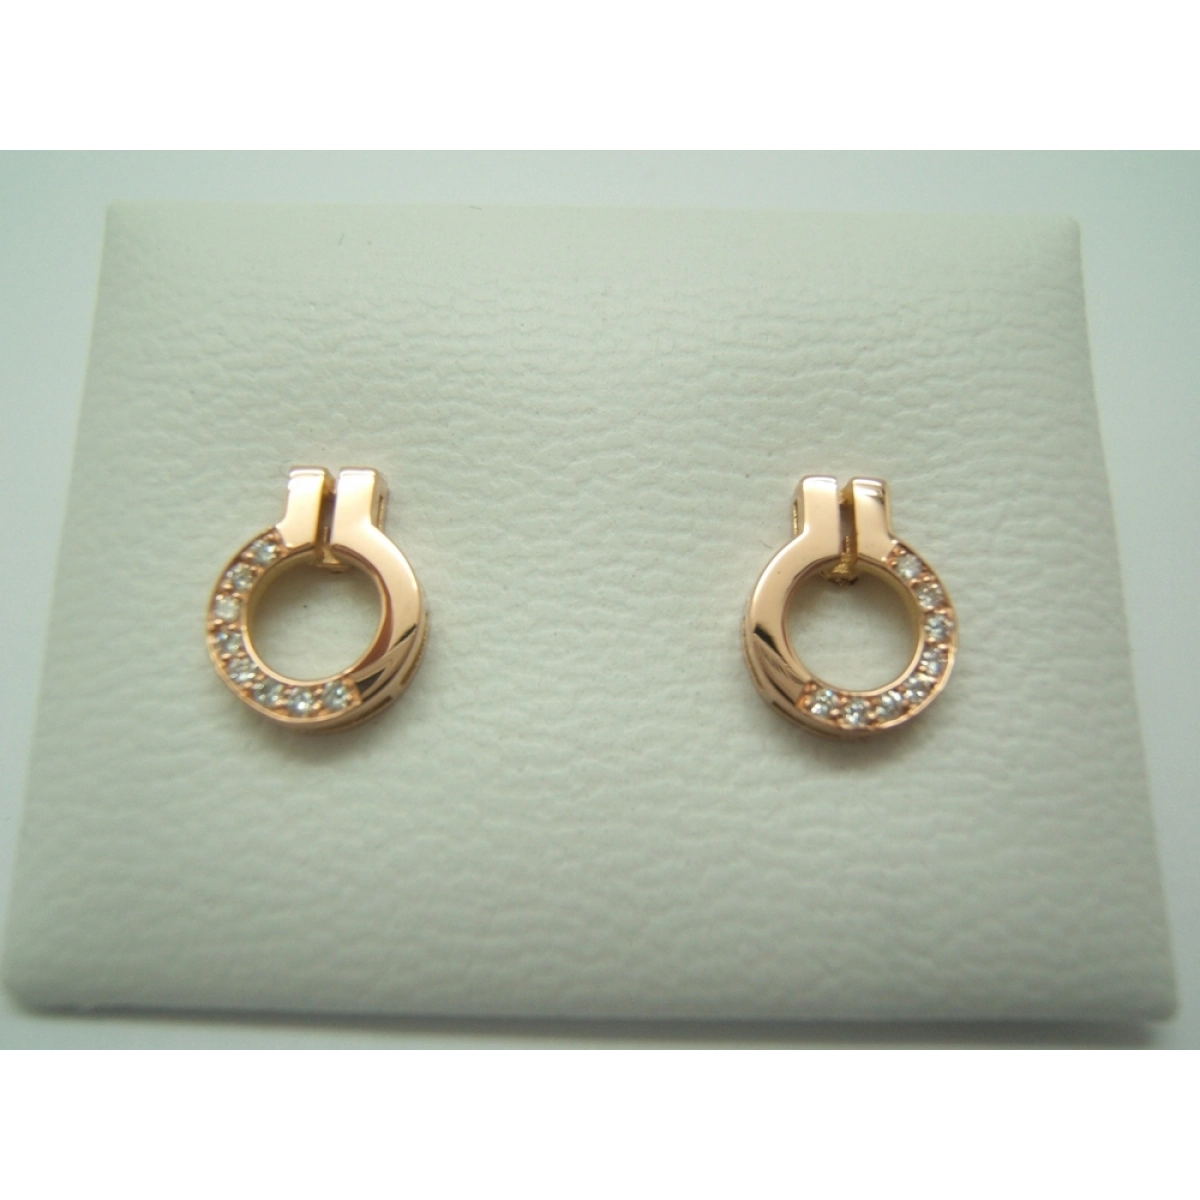 EARRINGS PINK GOLD AND DIAMONDS B-79